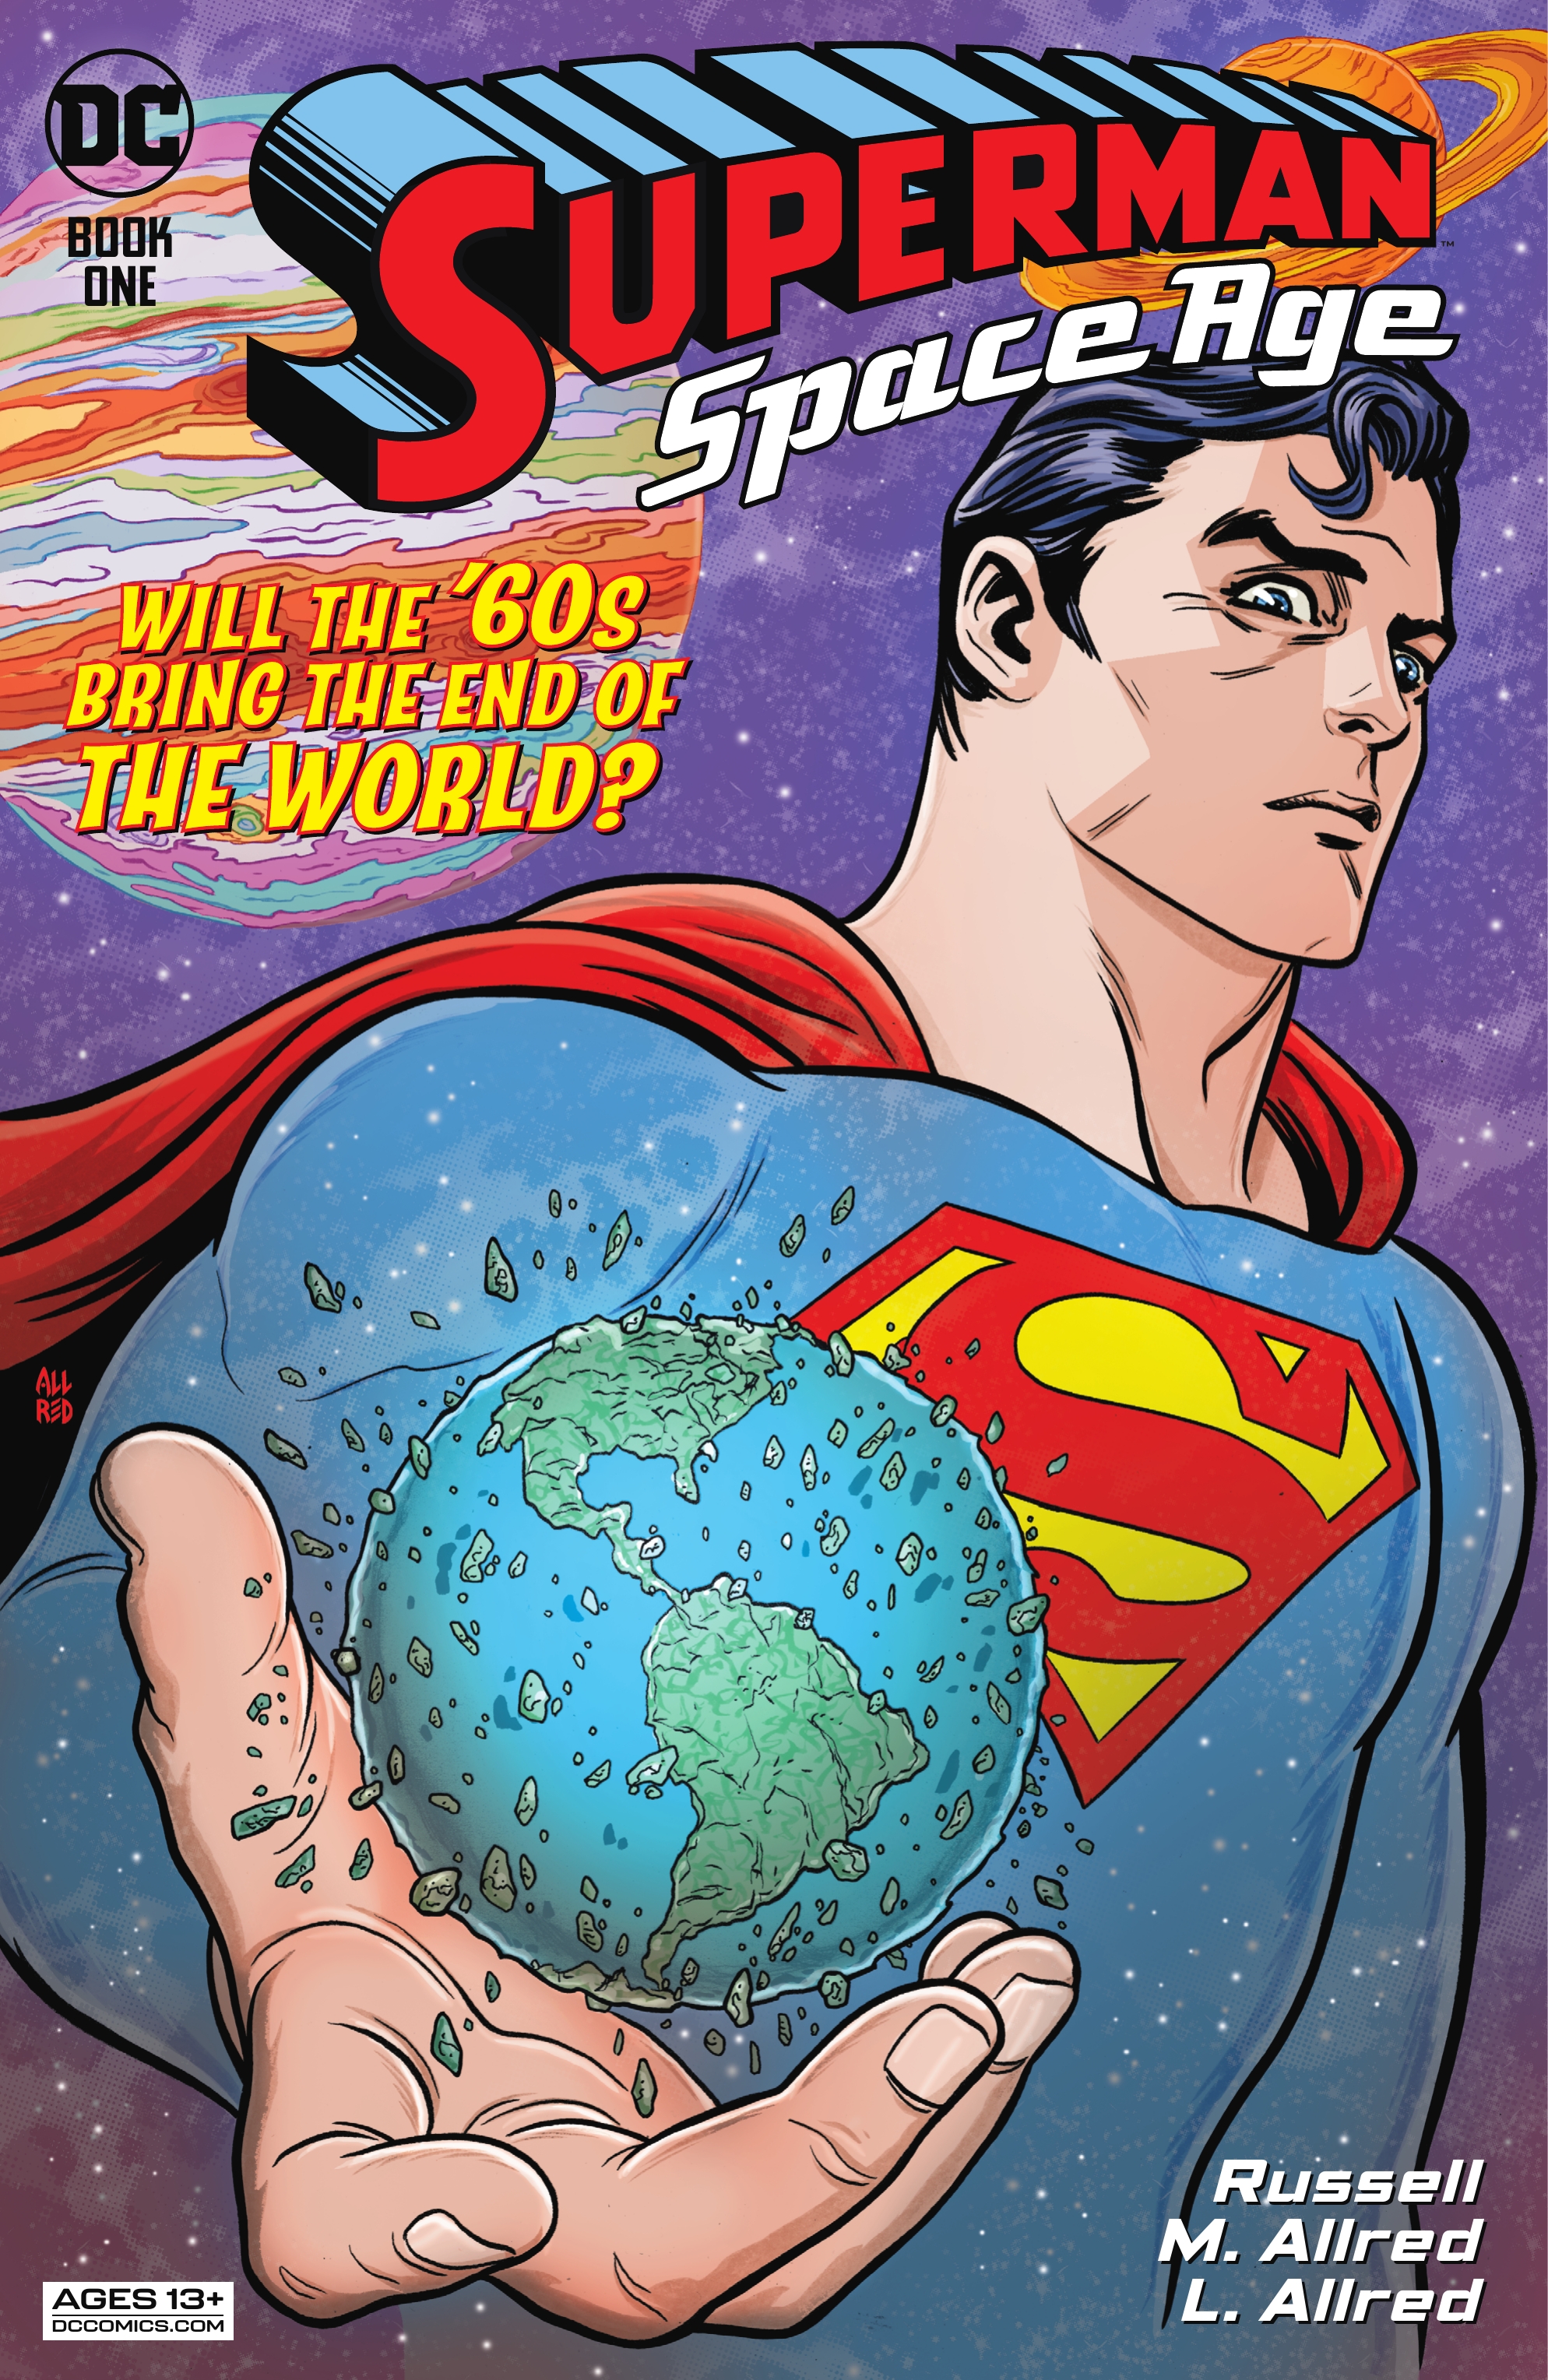 Read online Superman: Space Age comic -  Issue # TPB 1 - 1